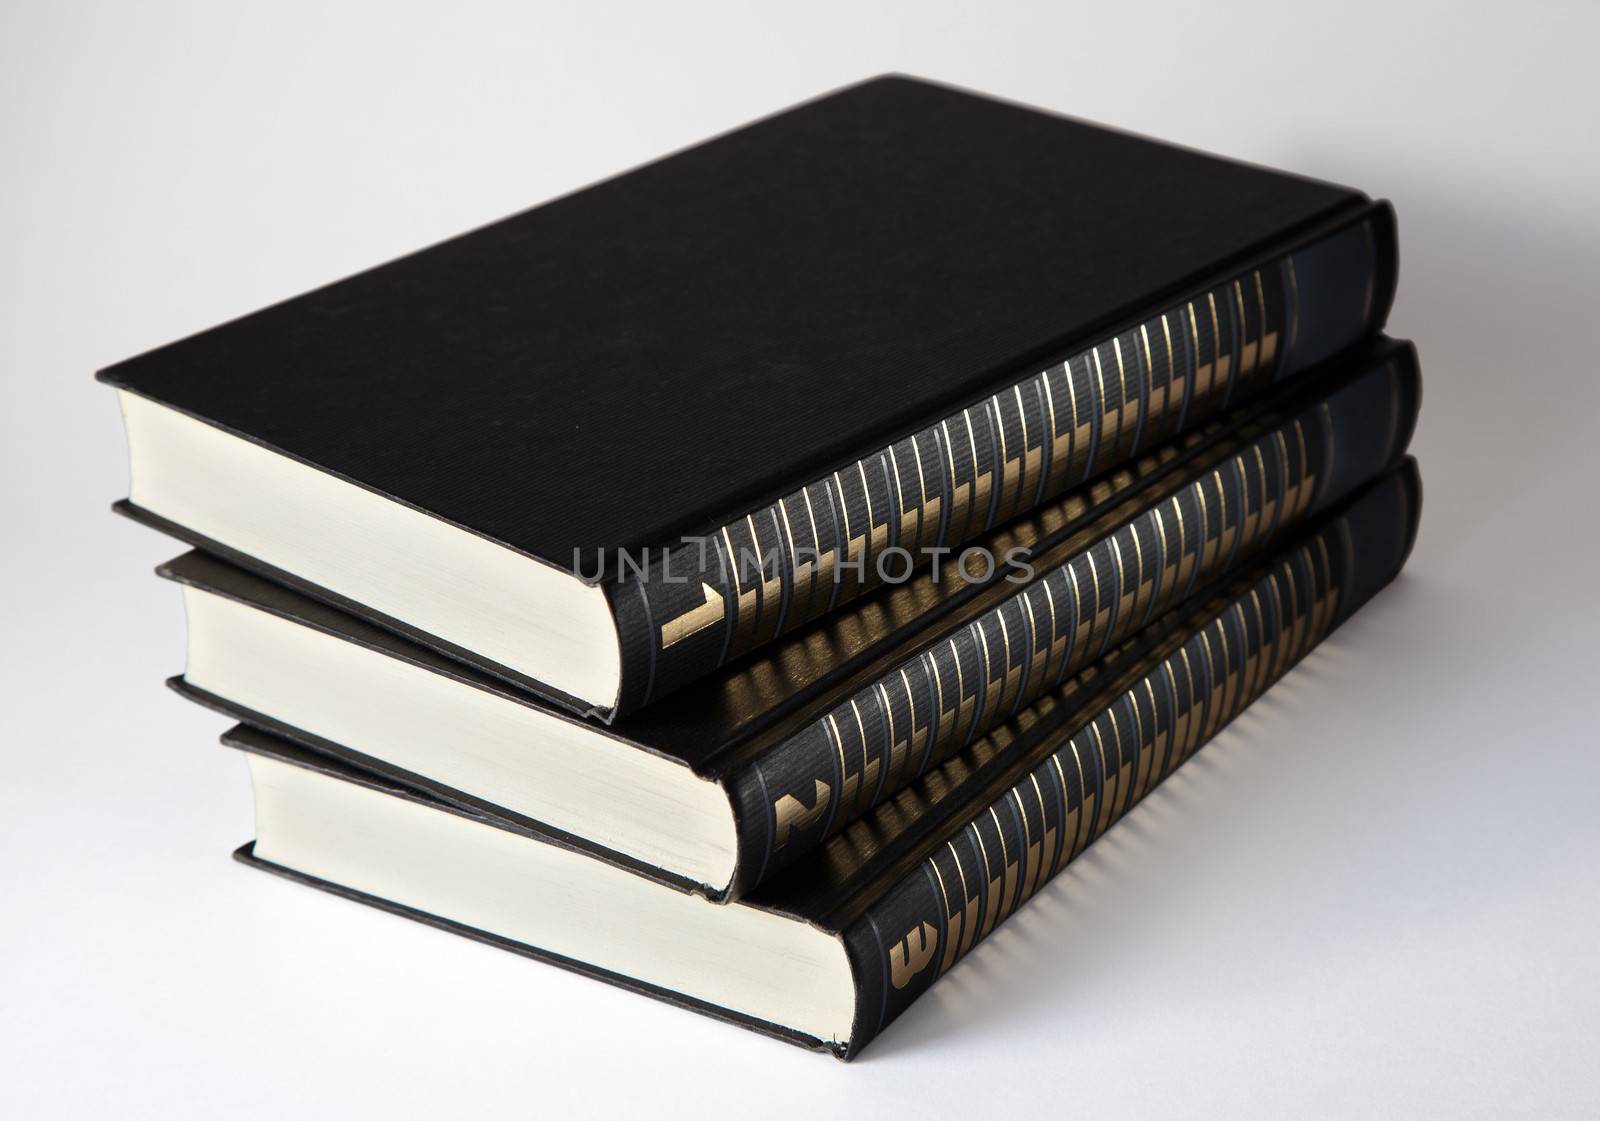 three books in black covers on light background